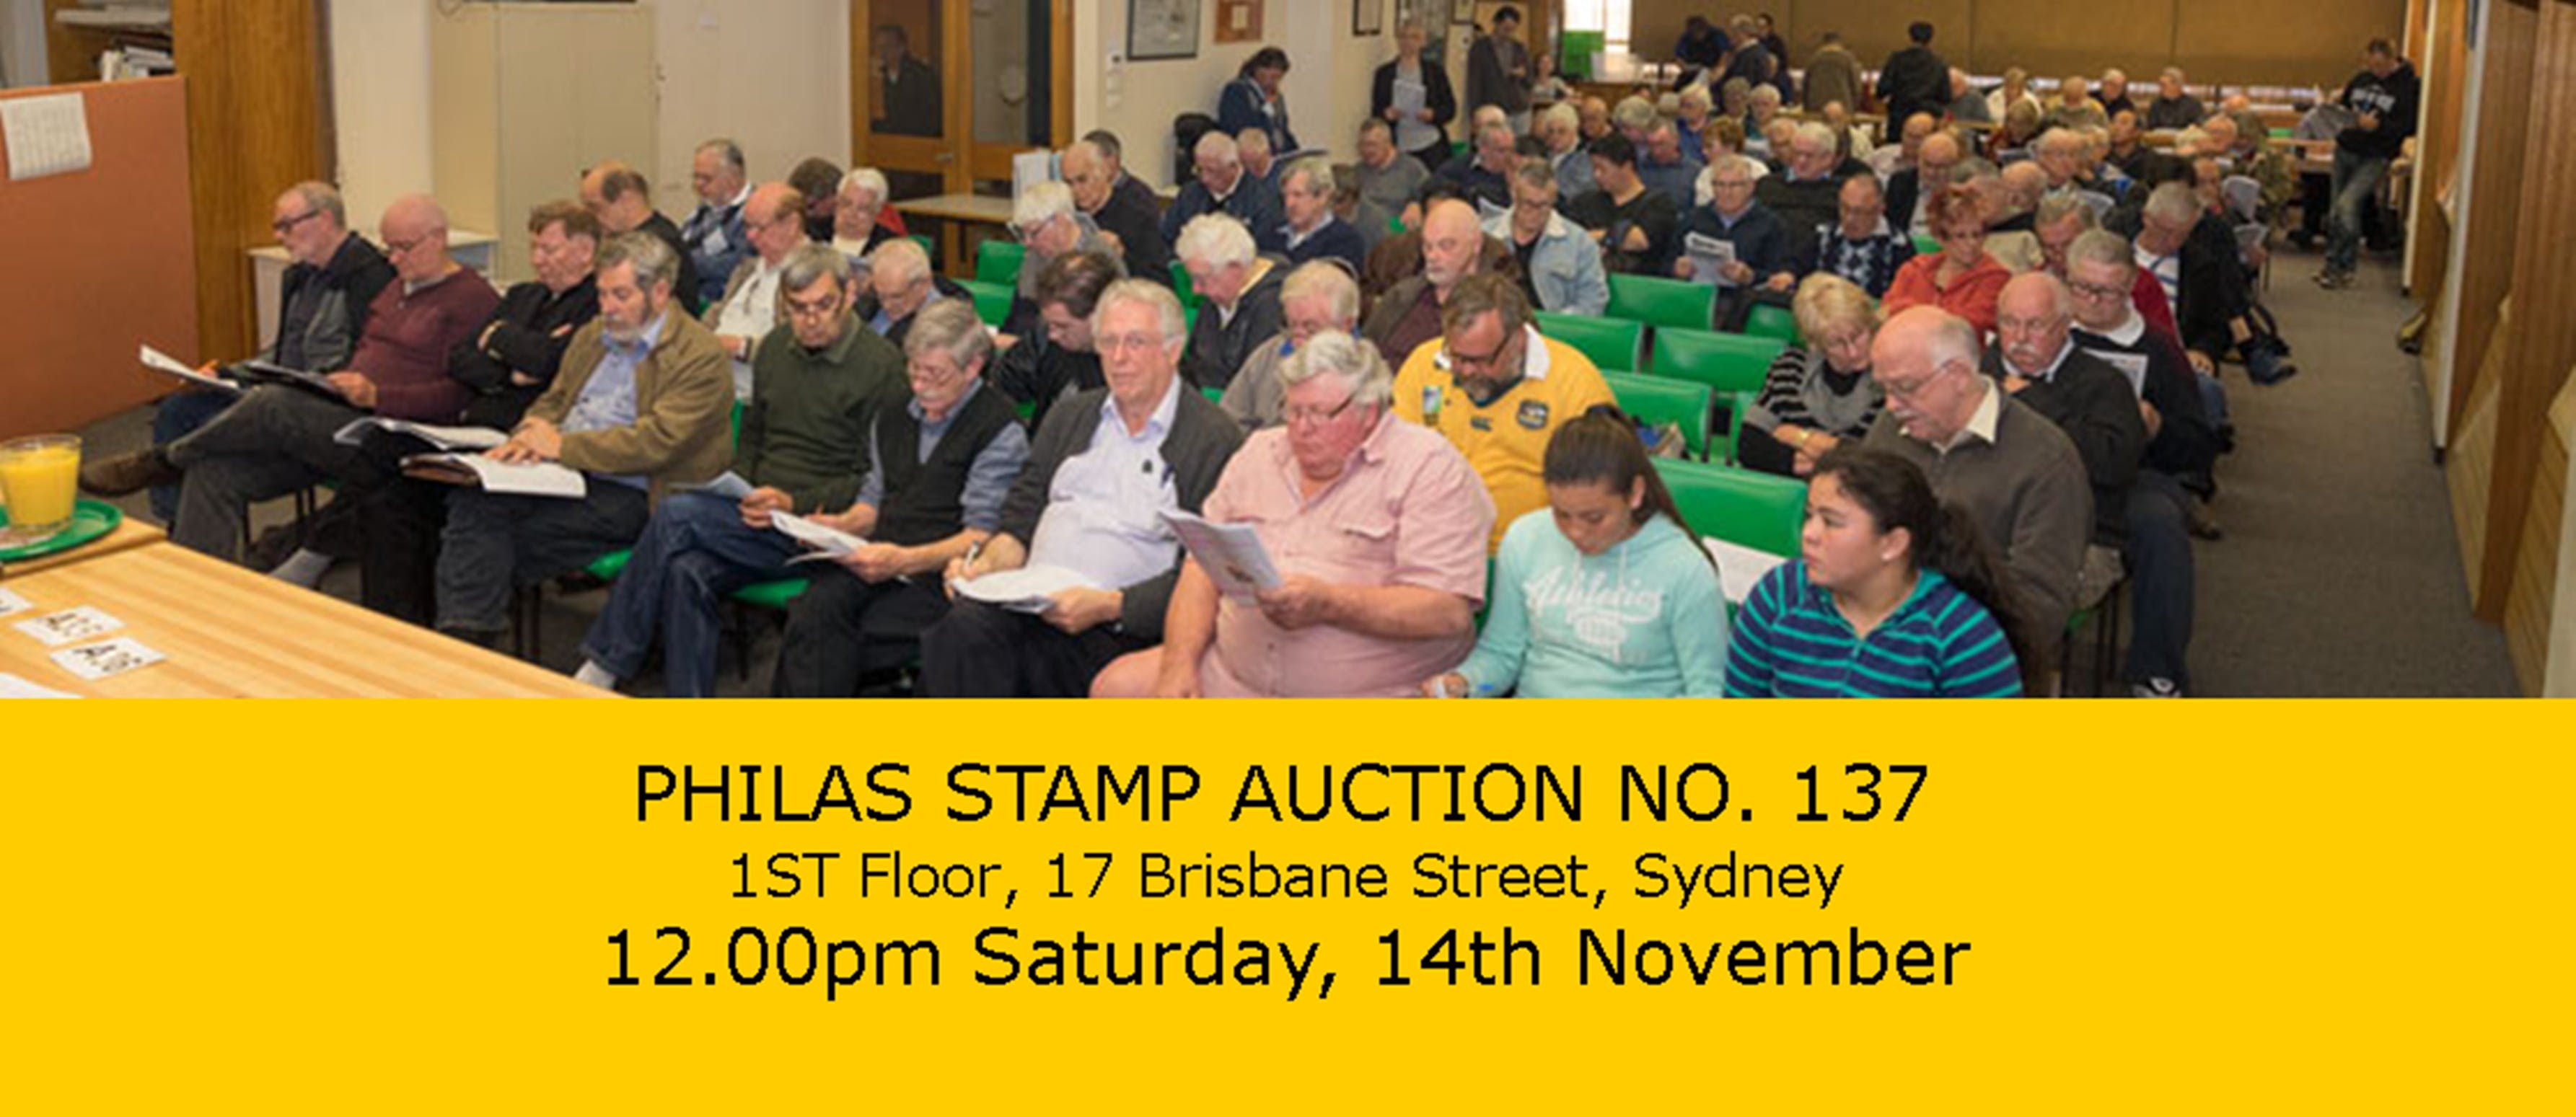 PHILAS Stamp Auction No. 137 - thumb 2